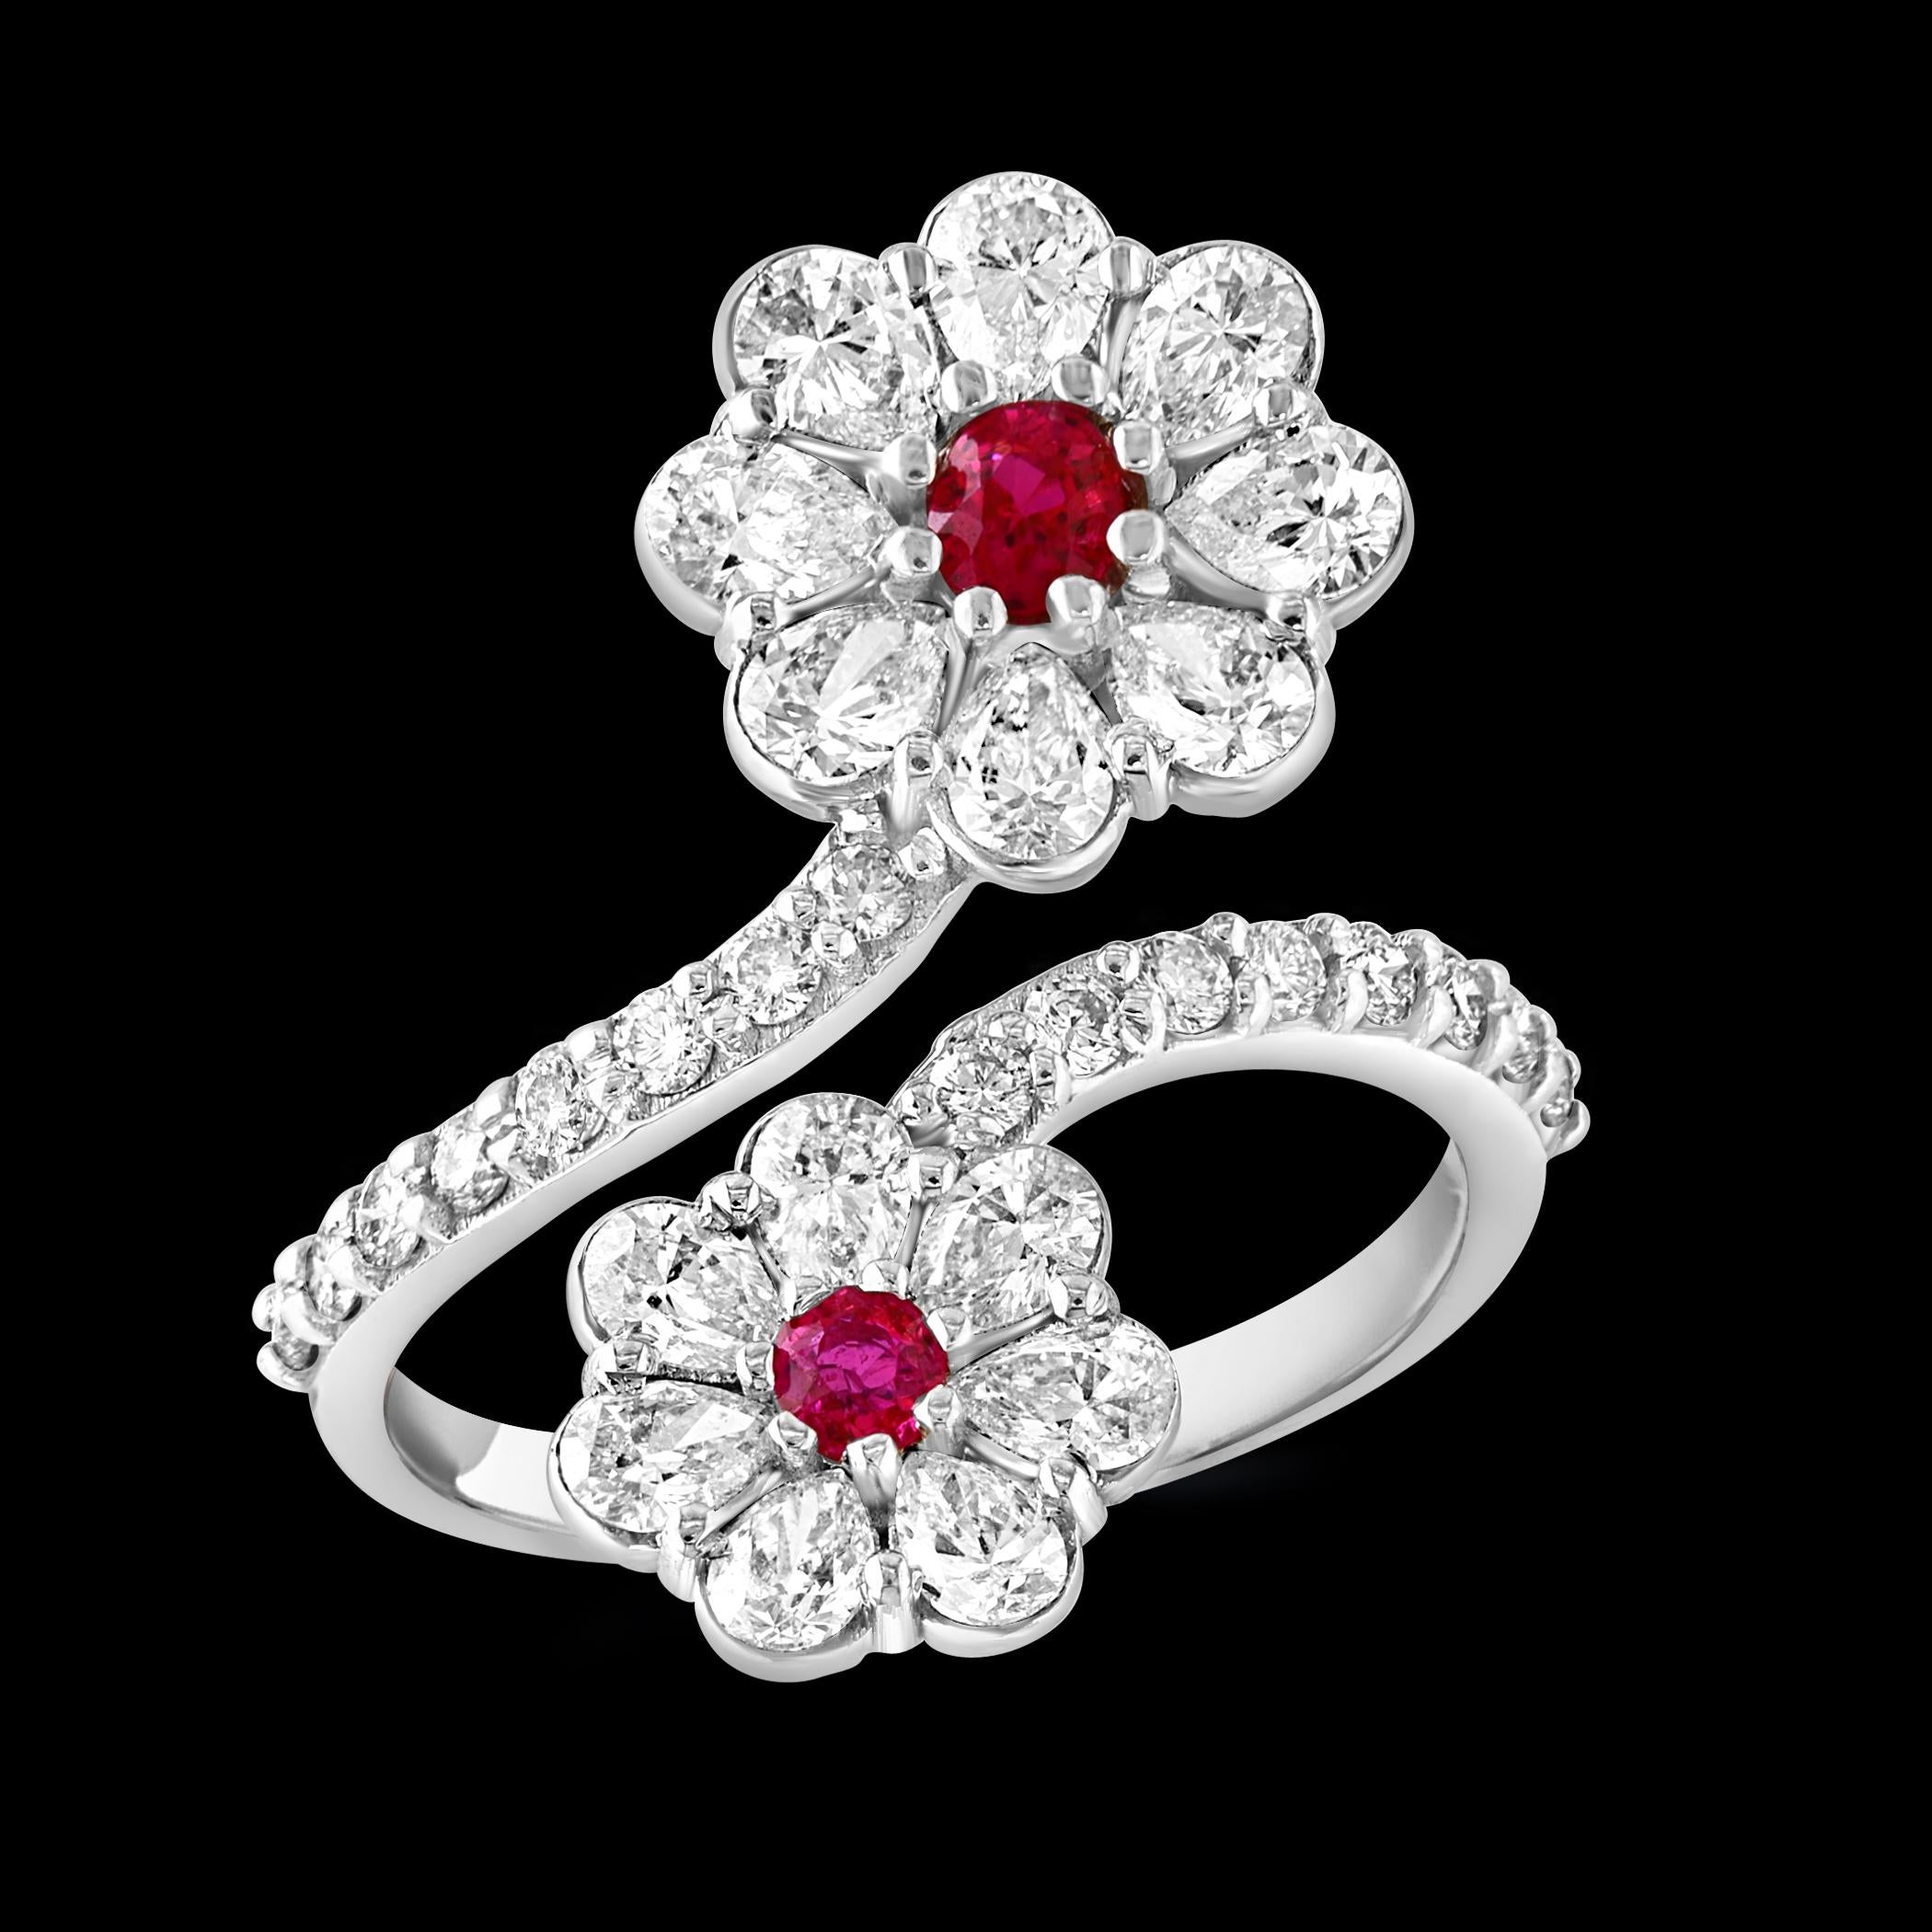 Introducing our exquisite 18 Karat Gold Ring, which showcases a stunning 0.30 Carat natural Ruby alongside 2 Carats of brilliant cut and Pear shape diamonds set in lustrous white gold. This ring stands as a true symbol of beauty and elegance,